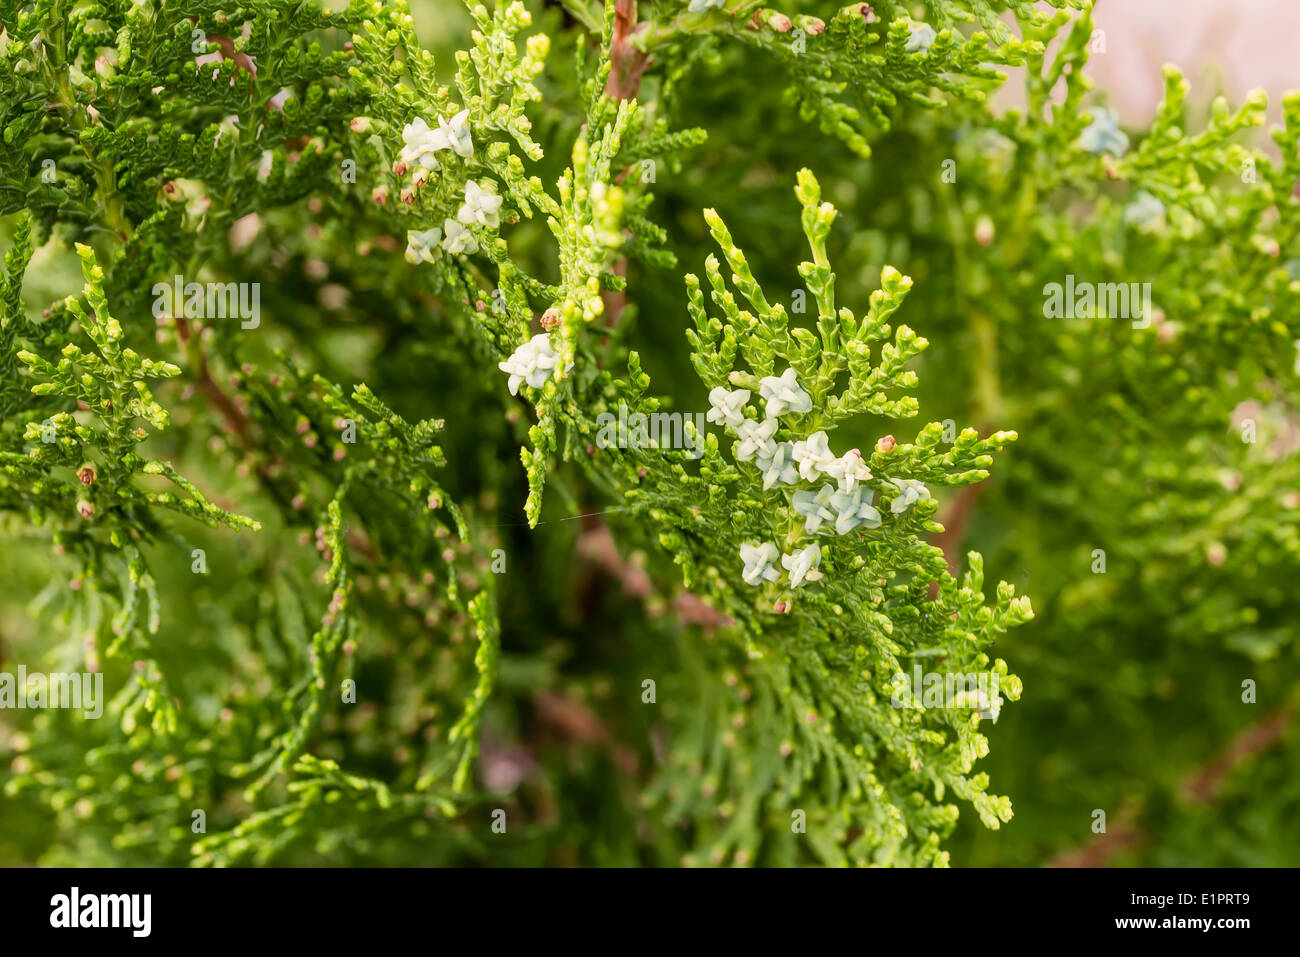 Detail of thuja branches with fruits and flowers Stock Photo